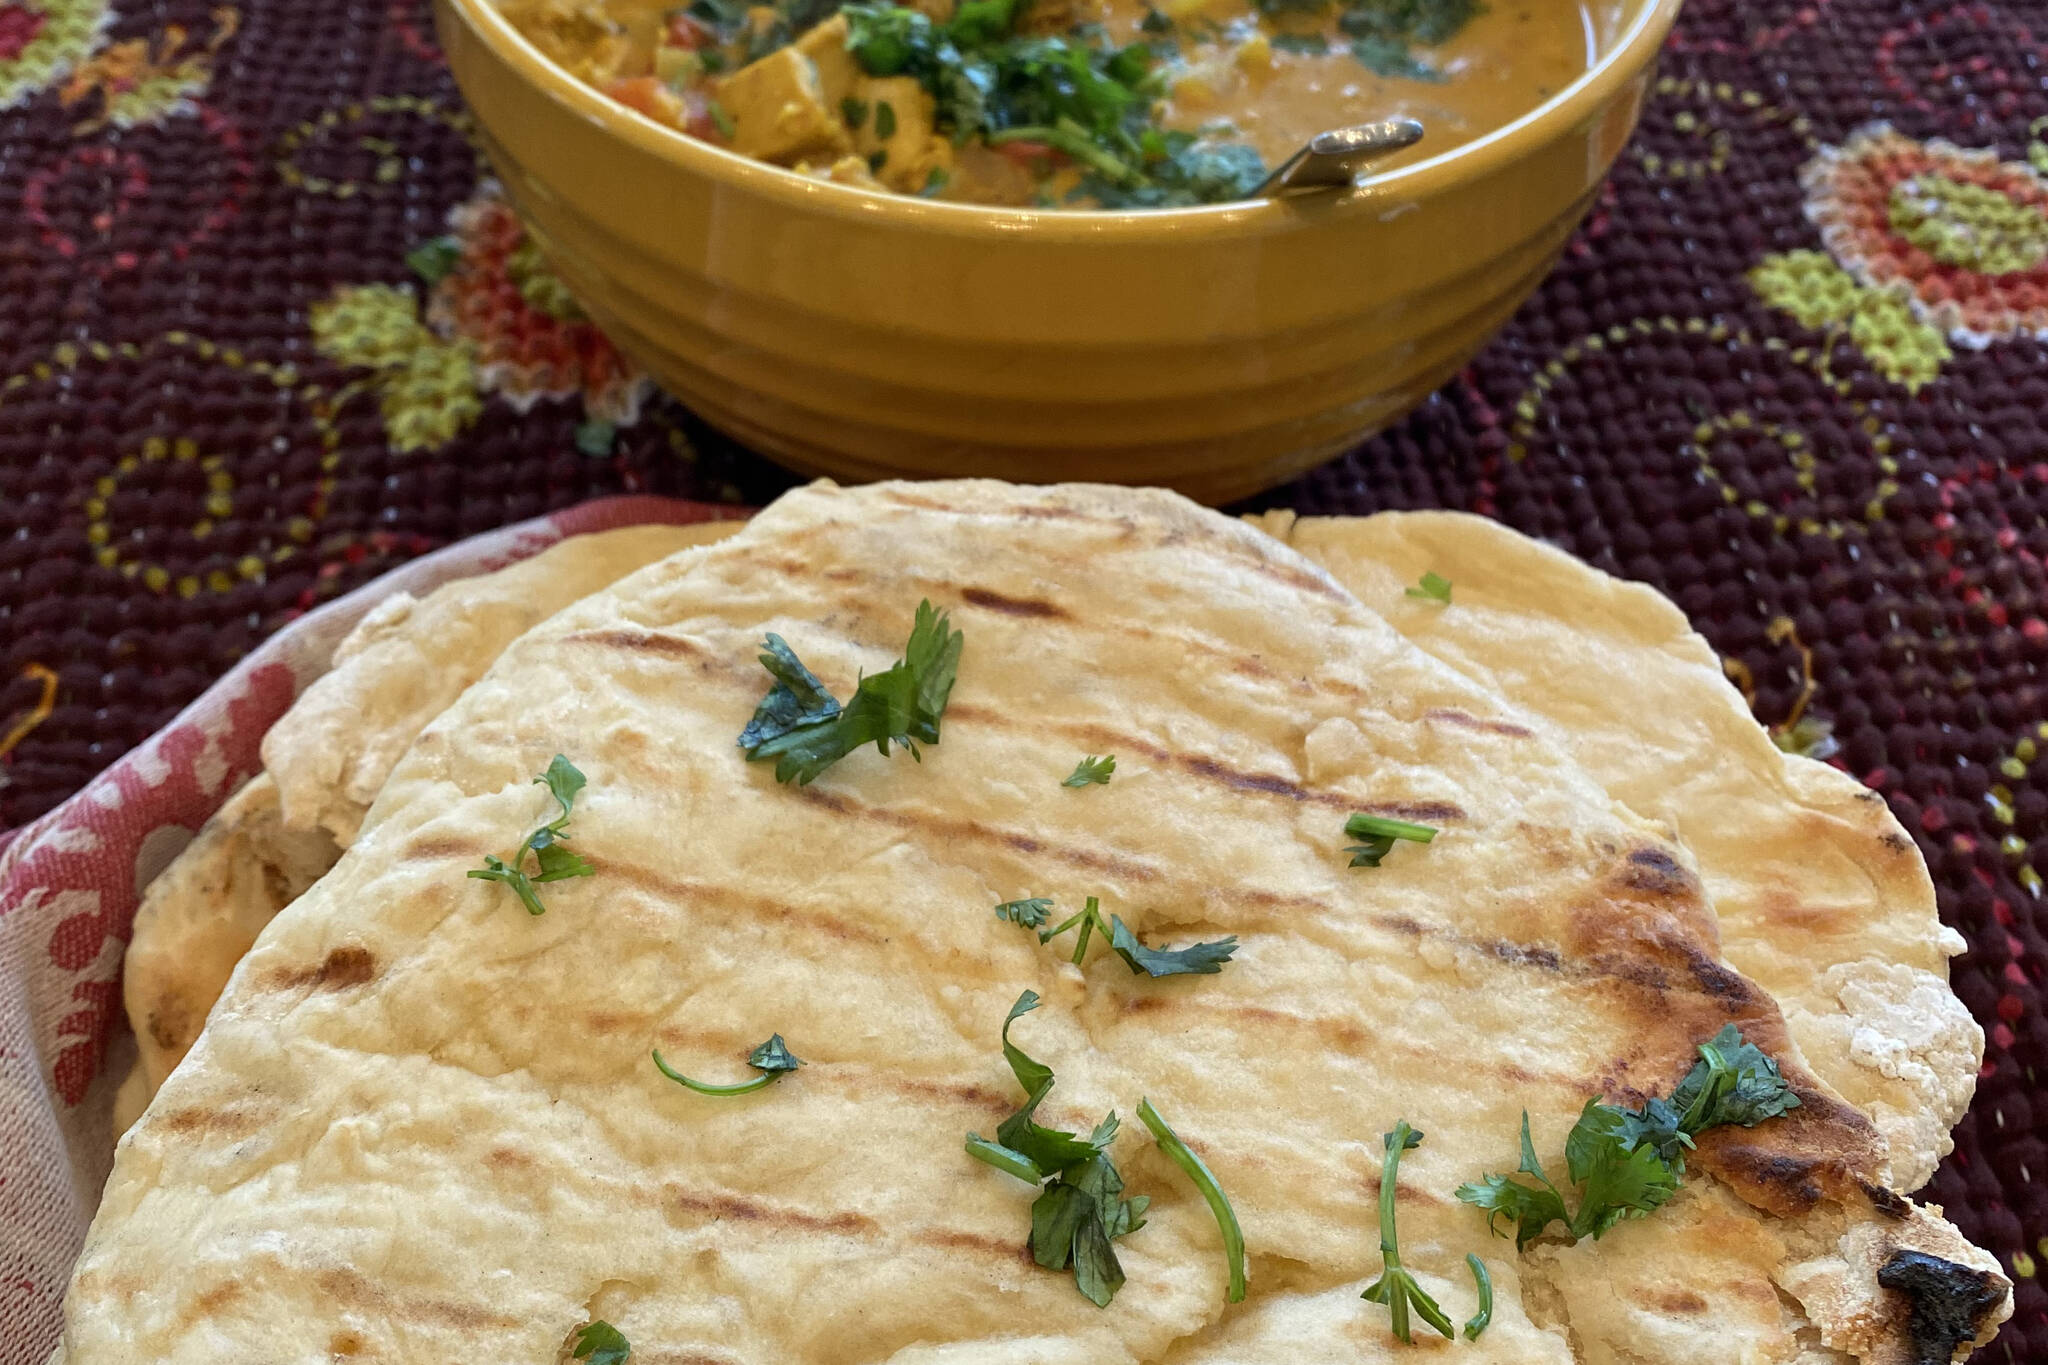 Homemade garlic naan is served with a meal of palak tofu, butter chicken, basmati rice and cucumber salad. (Photo by Tressa Dale/Peninsula Clarion)